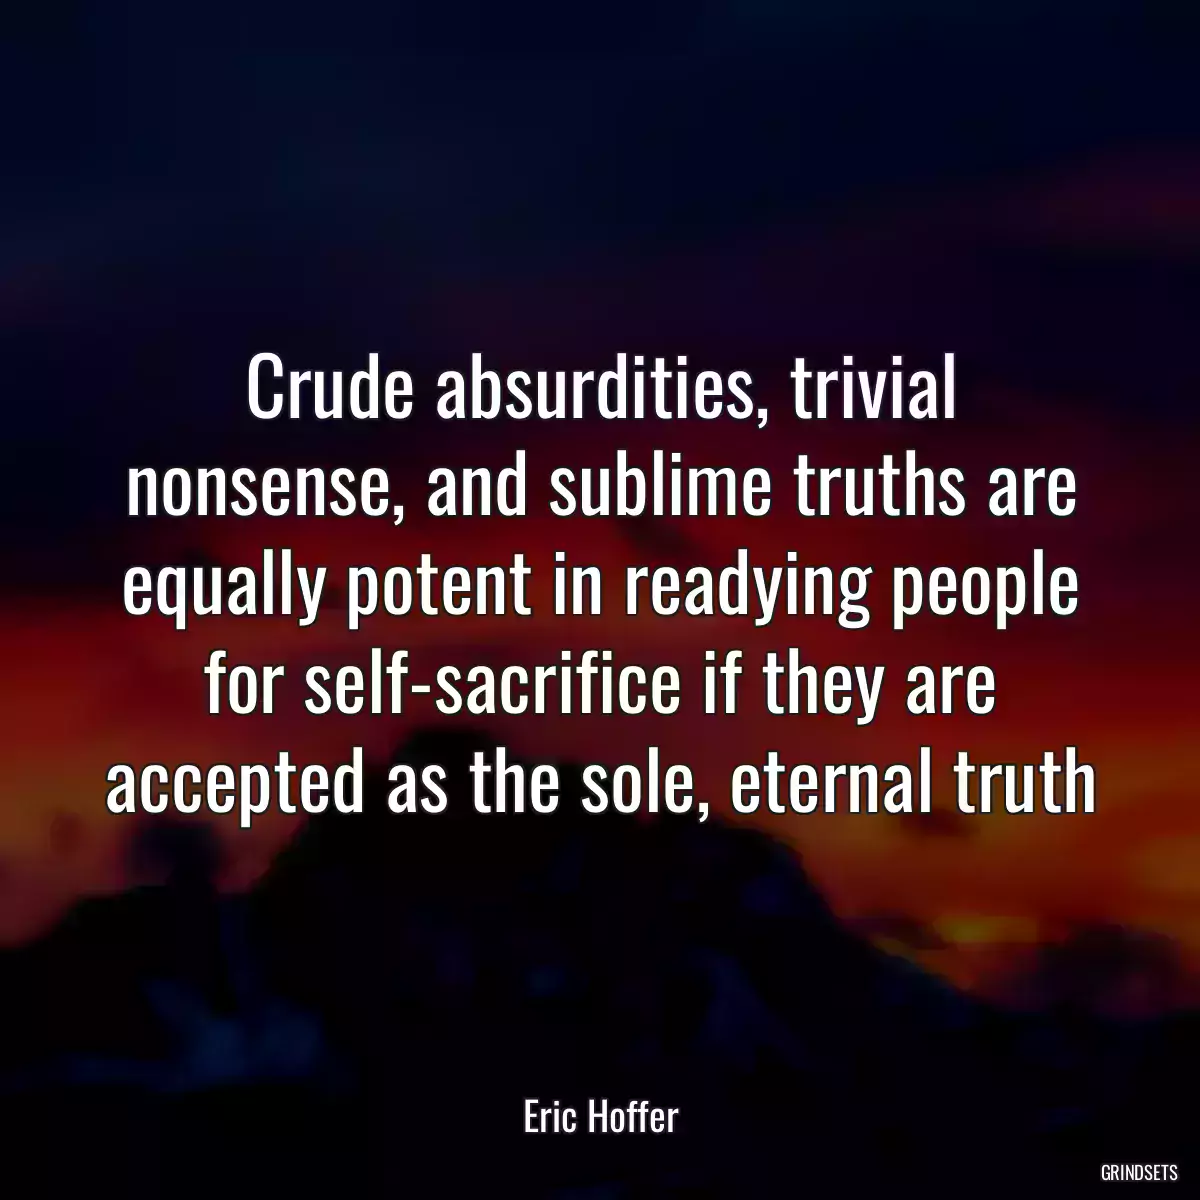 Crude absurdities, trivial nonsense, and sublime truths are equally potent in readying people for self-sacrifice if they are accepted as the sole, eternal truth